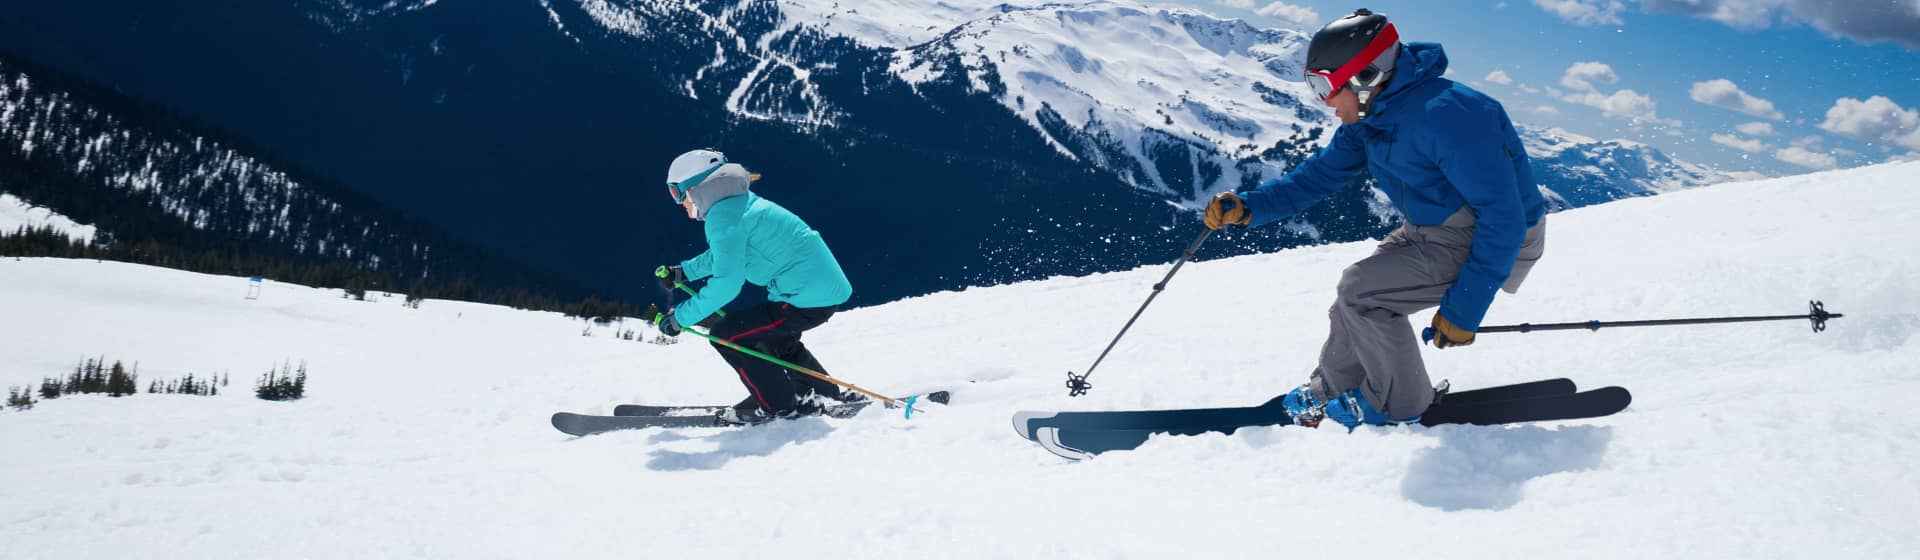 Couple skiing in snowy mountains